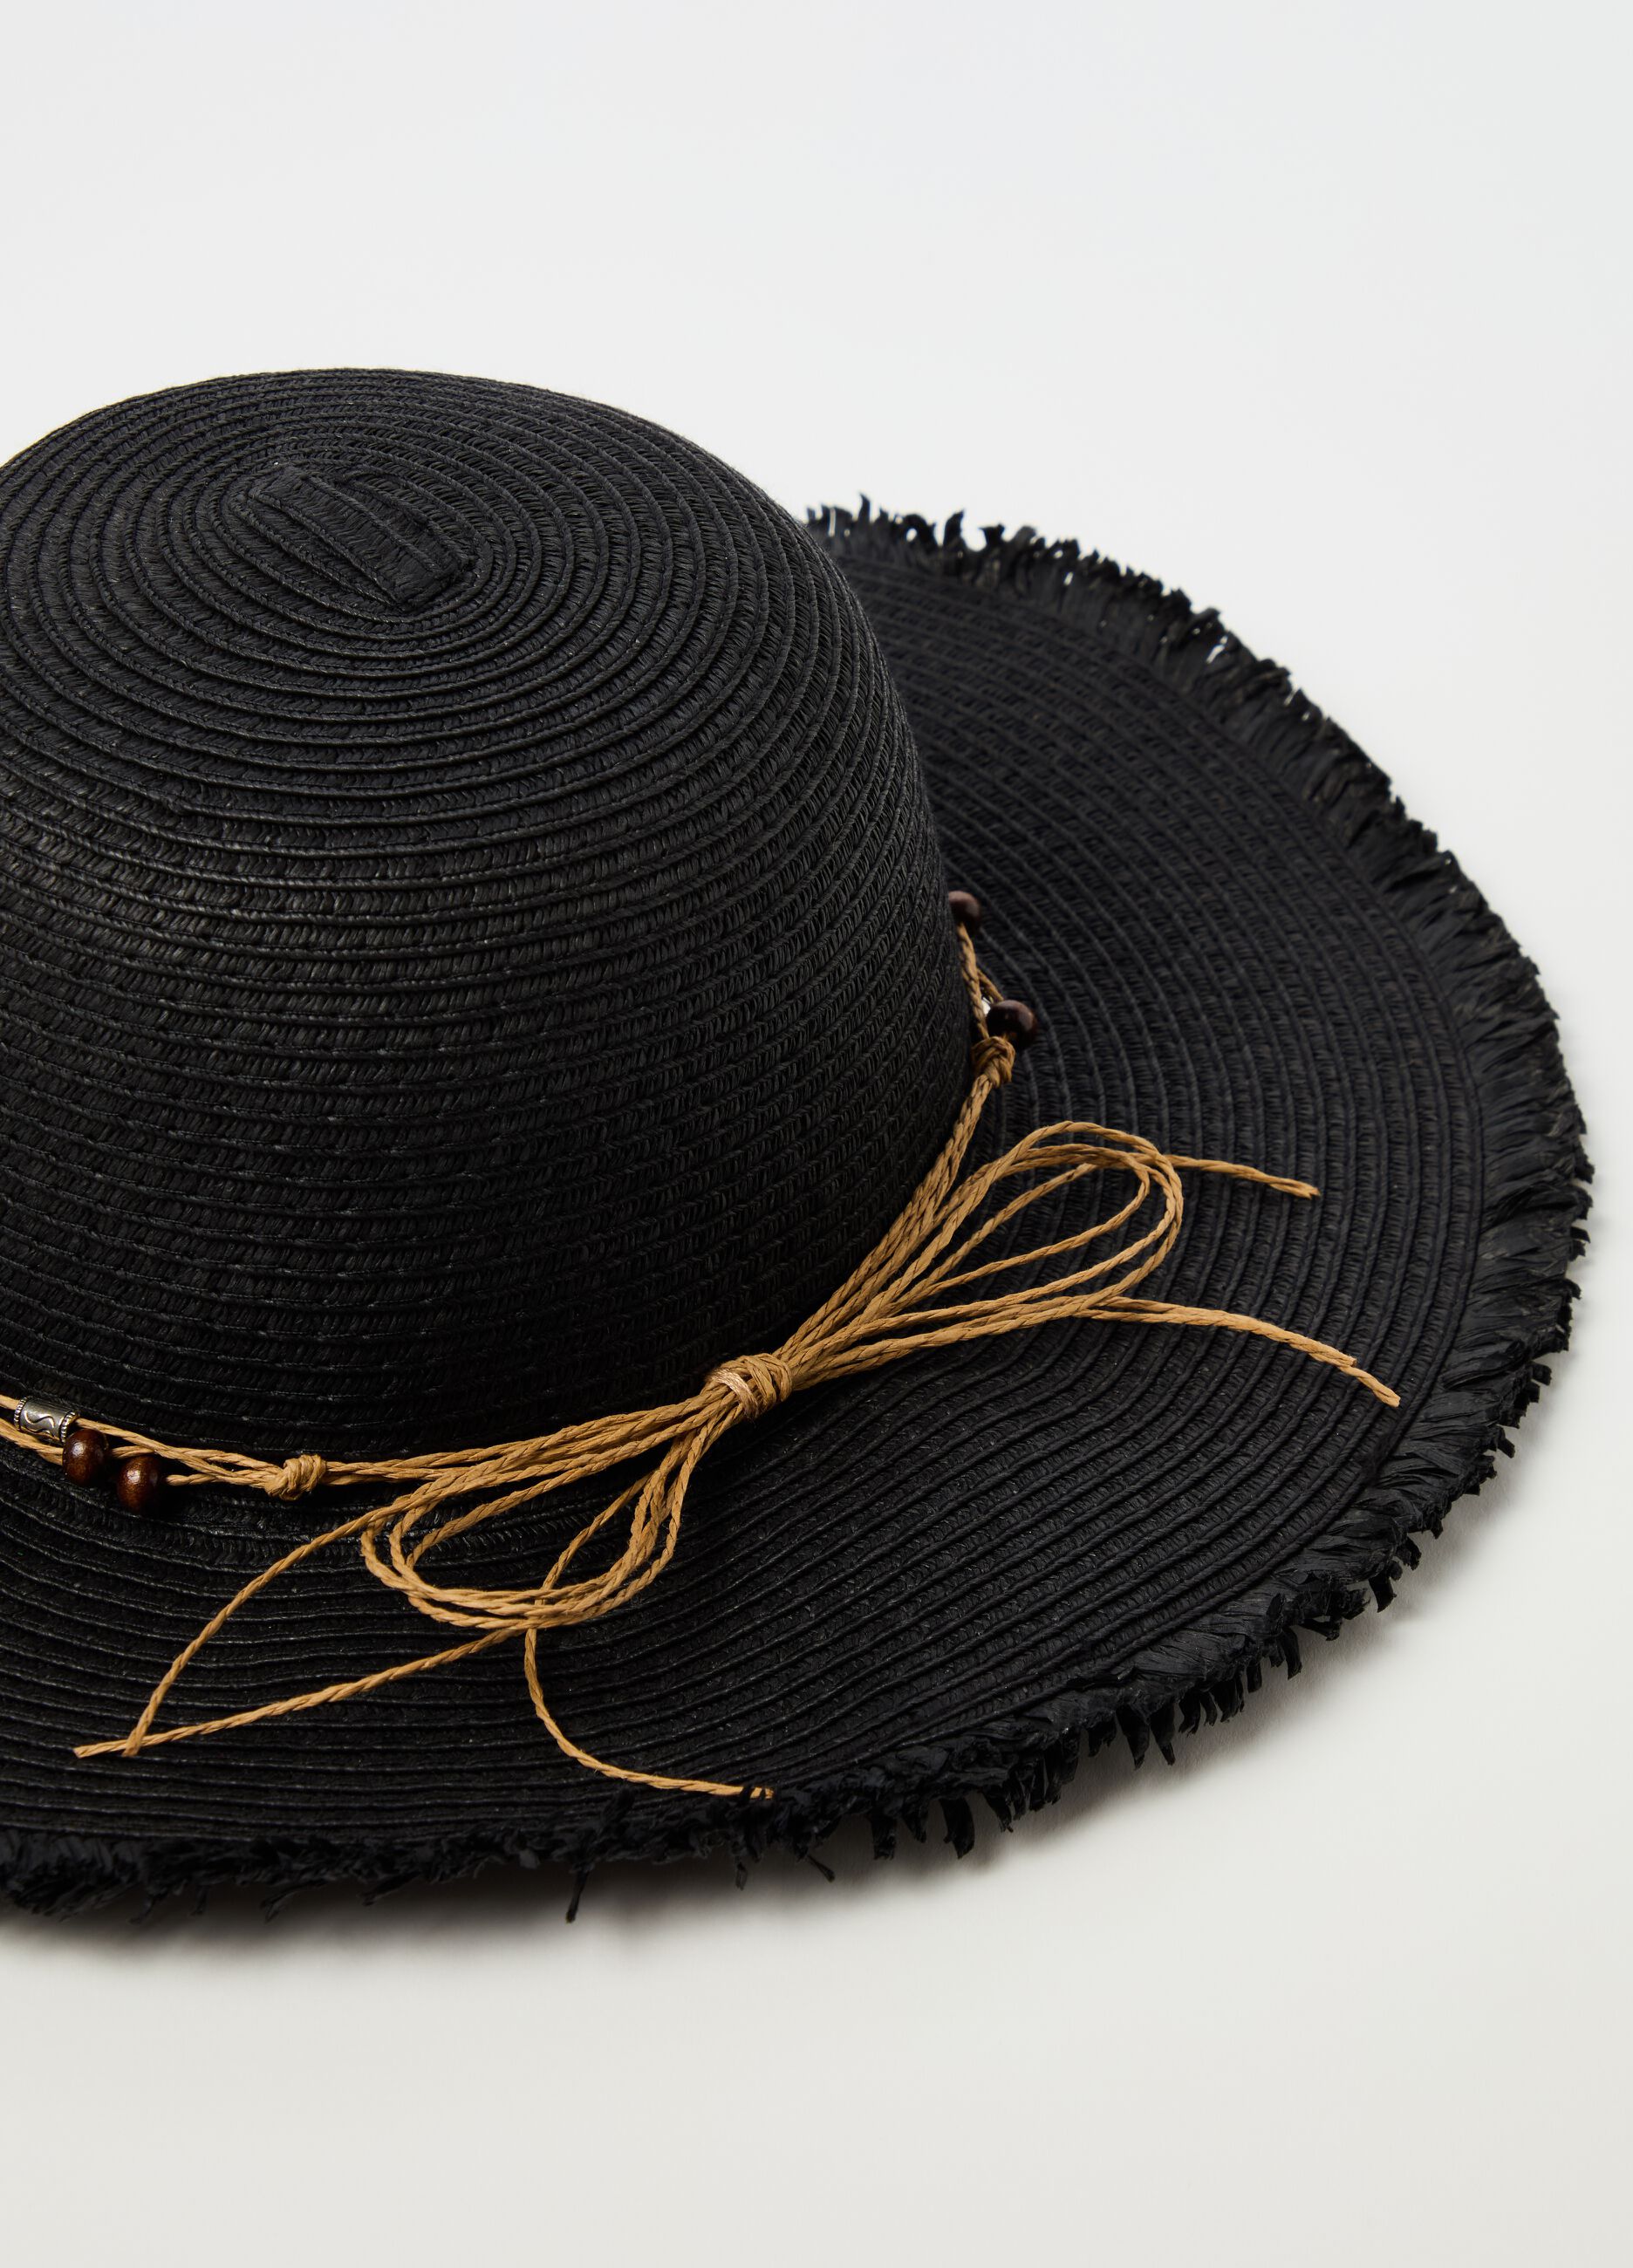 Straw hat with cord